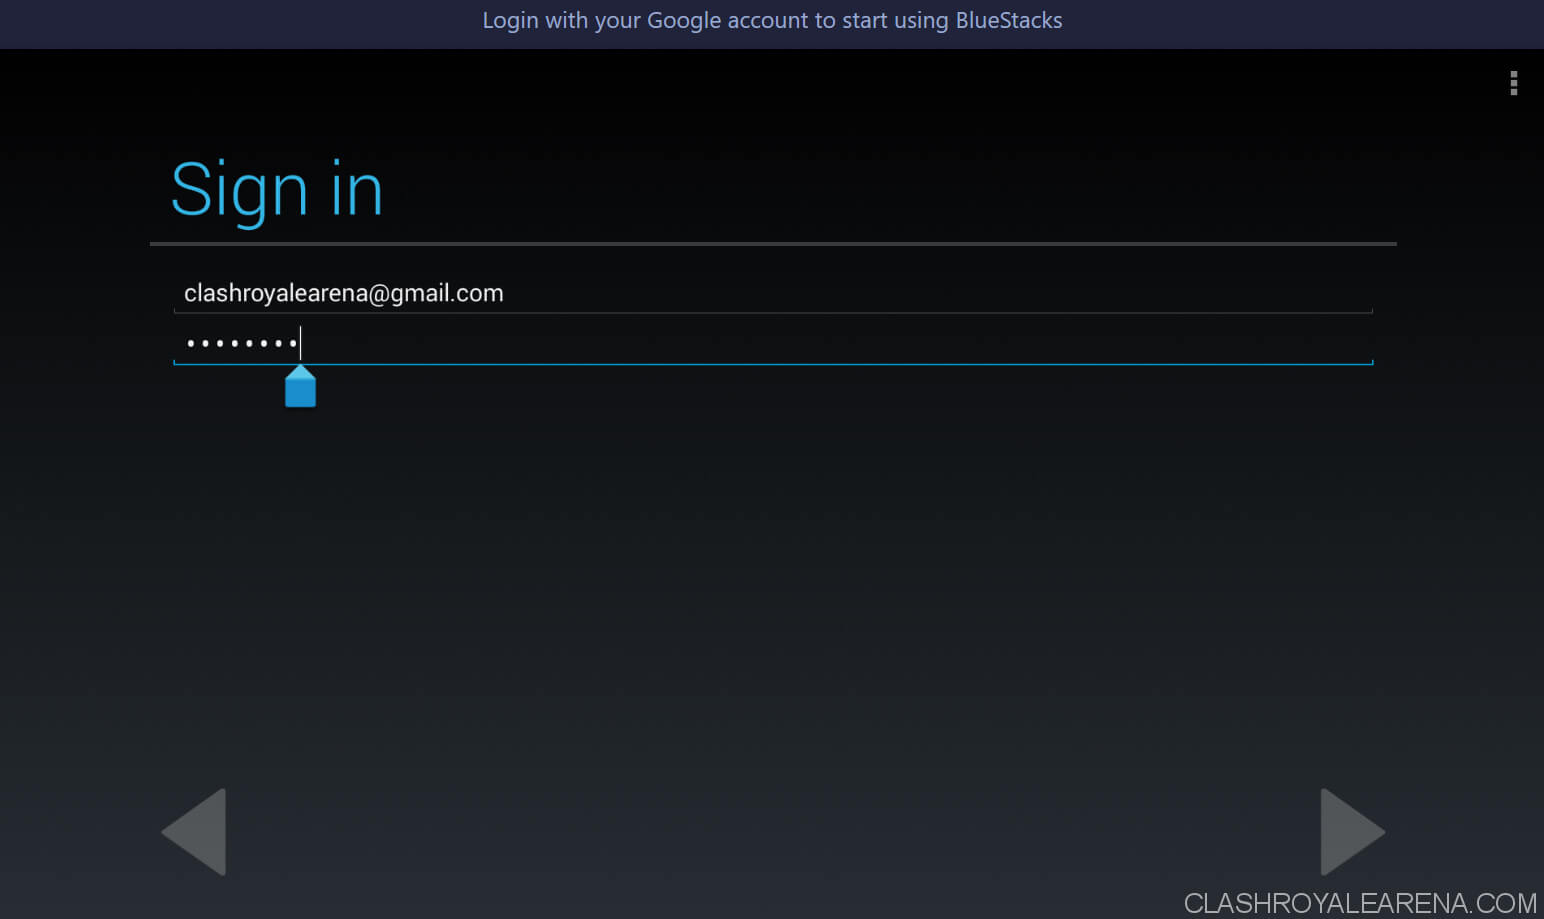 sign in with google account to use bluestacks